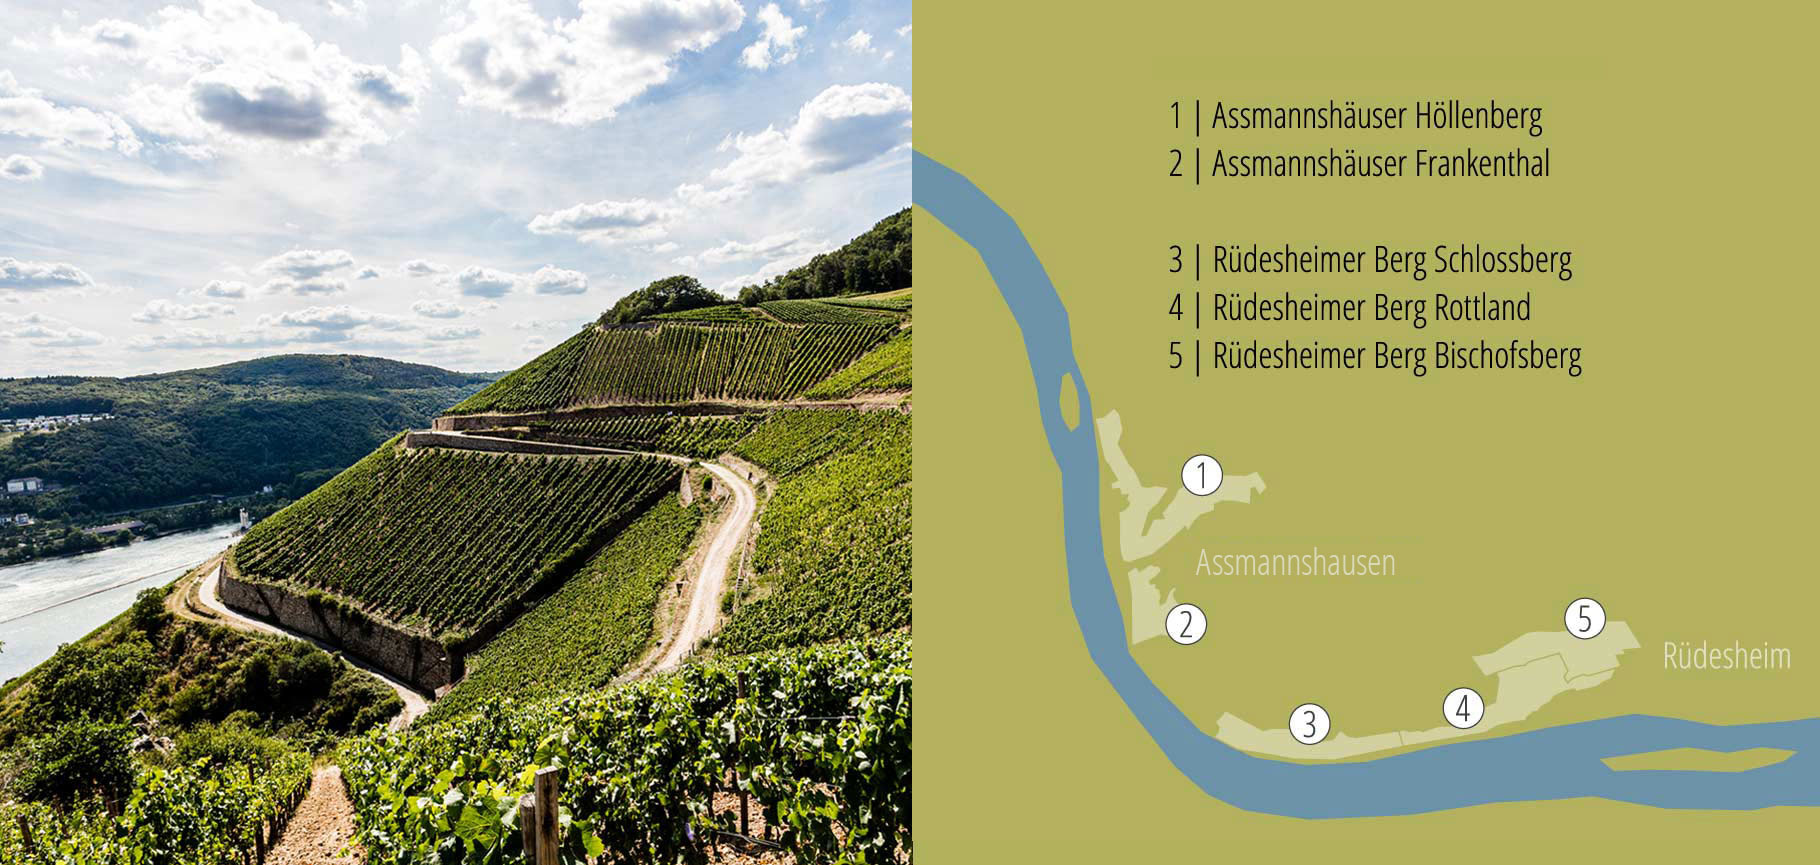 Illustration and photo of the vineyard sites in Rüdesheim and Assmannshausen